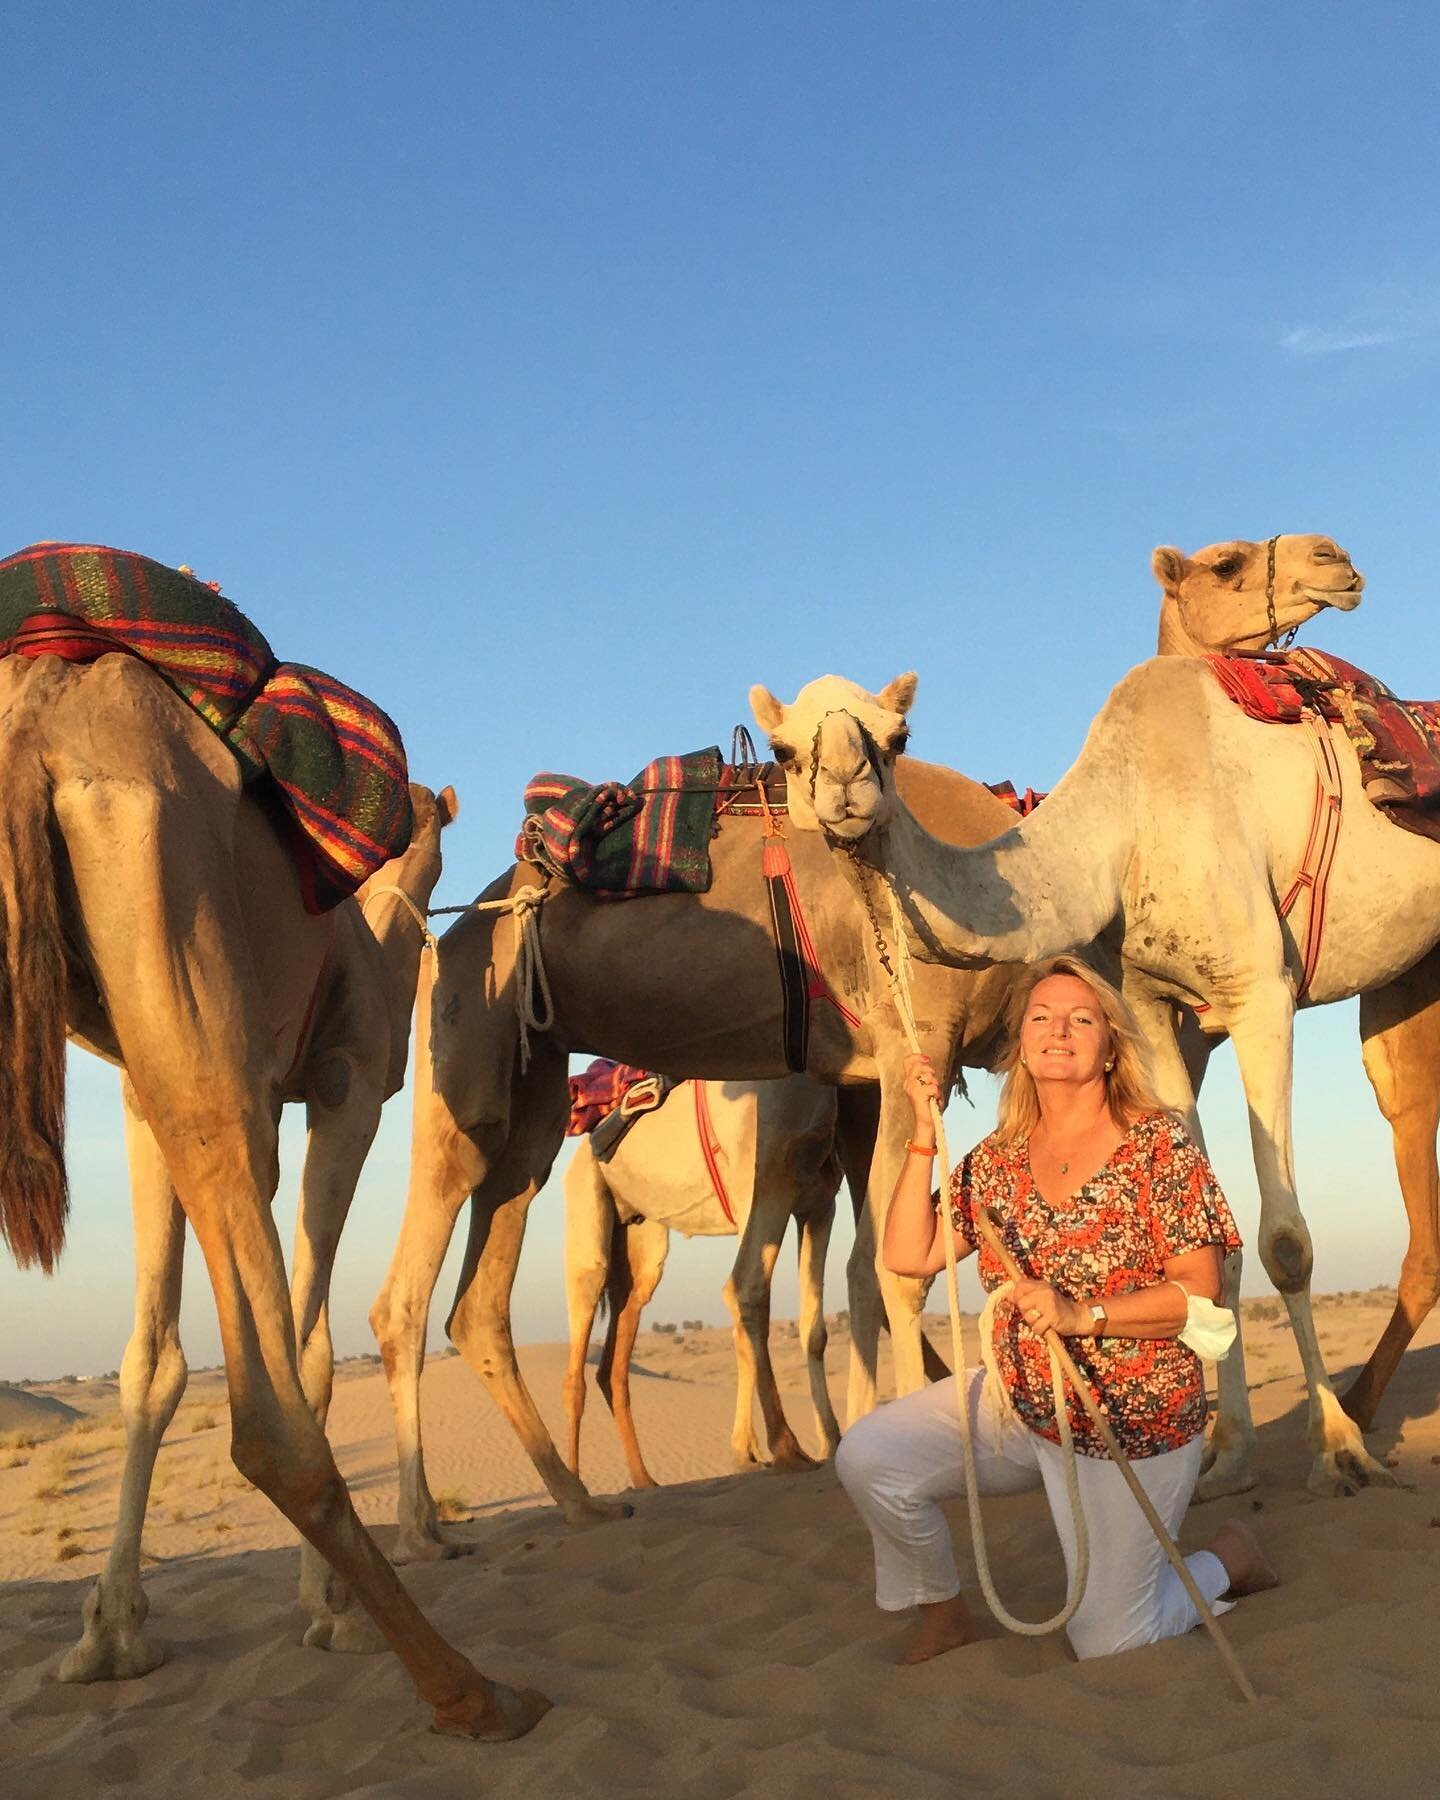 Happy International Camel Day 🐪🤩 There is no better way to celebrate it than going on an authentic Bedouin Camel ride 🐪😻 with our fantastic Guide Yannick 💙#camels #camellovers #mydubai🇦🇪 #dubaidesert #dubaiwildlife #yaydubai #thecamelfarmdubai